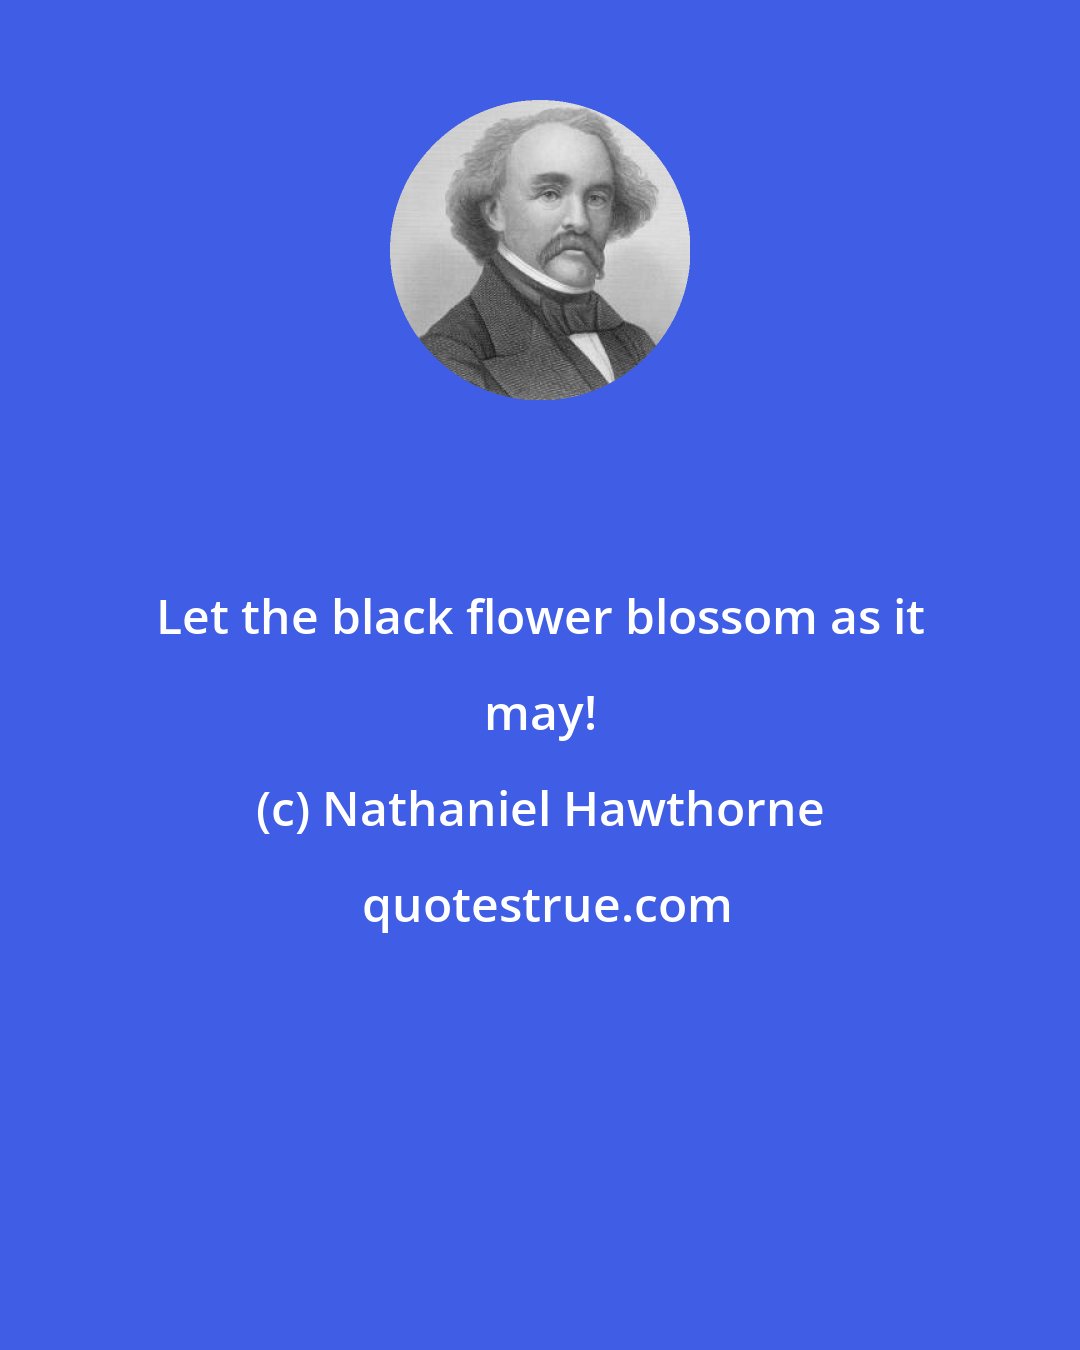 Nathaniel Hawthorne: Let the black flower blossom as it may!